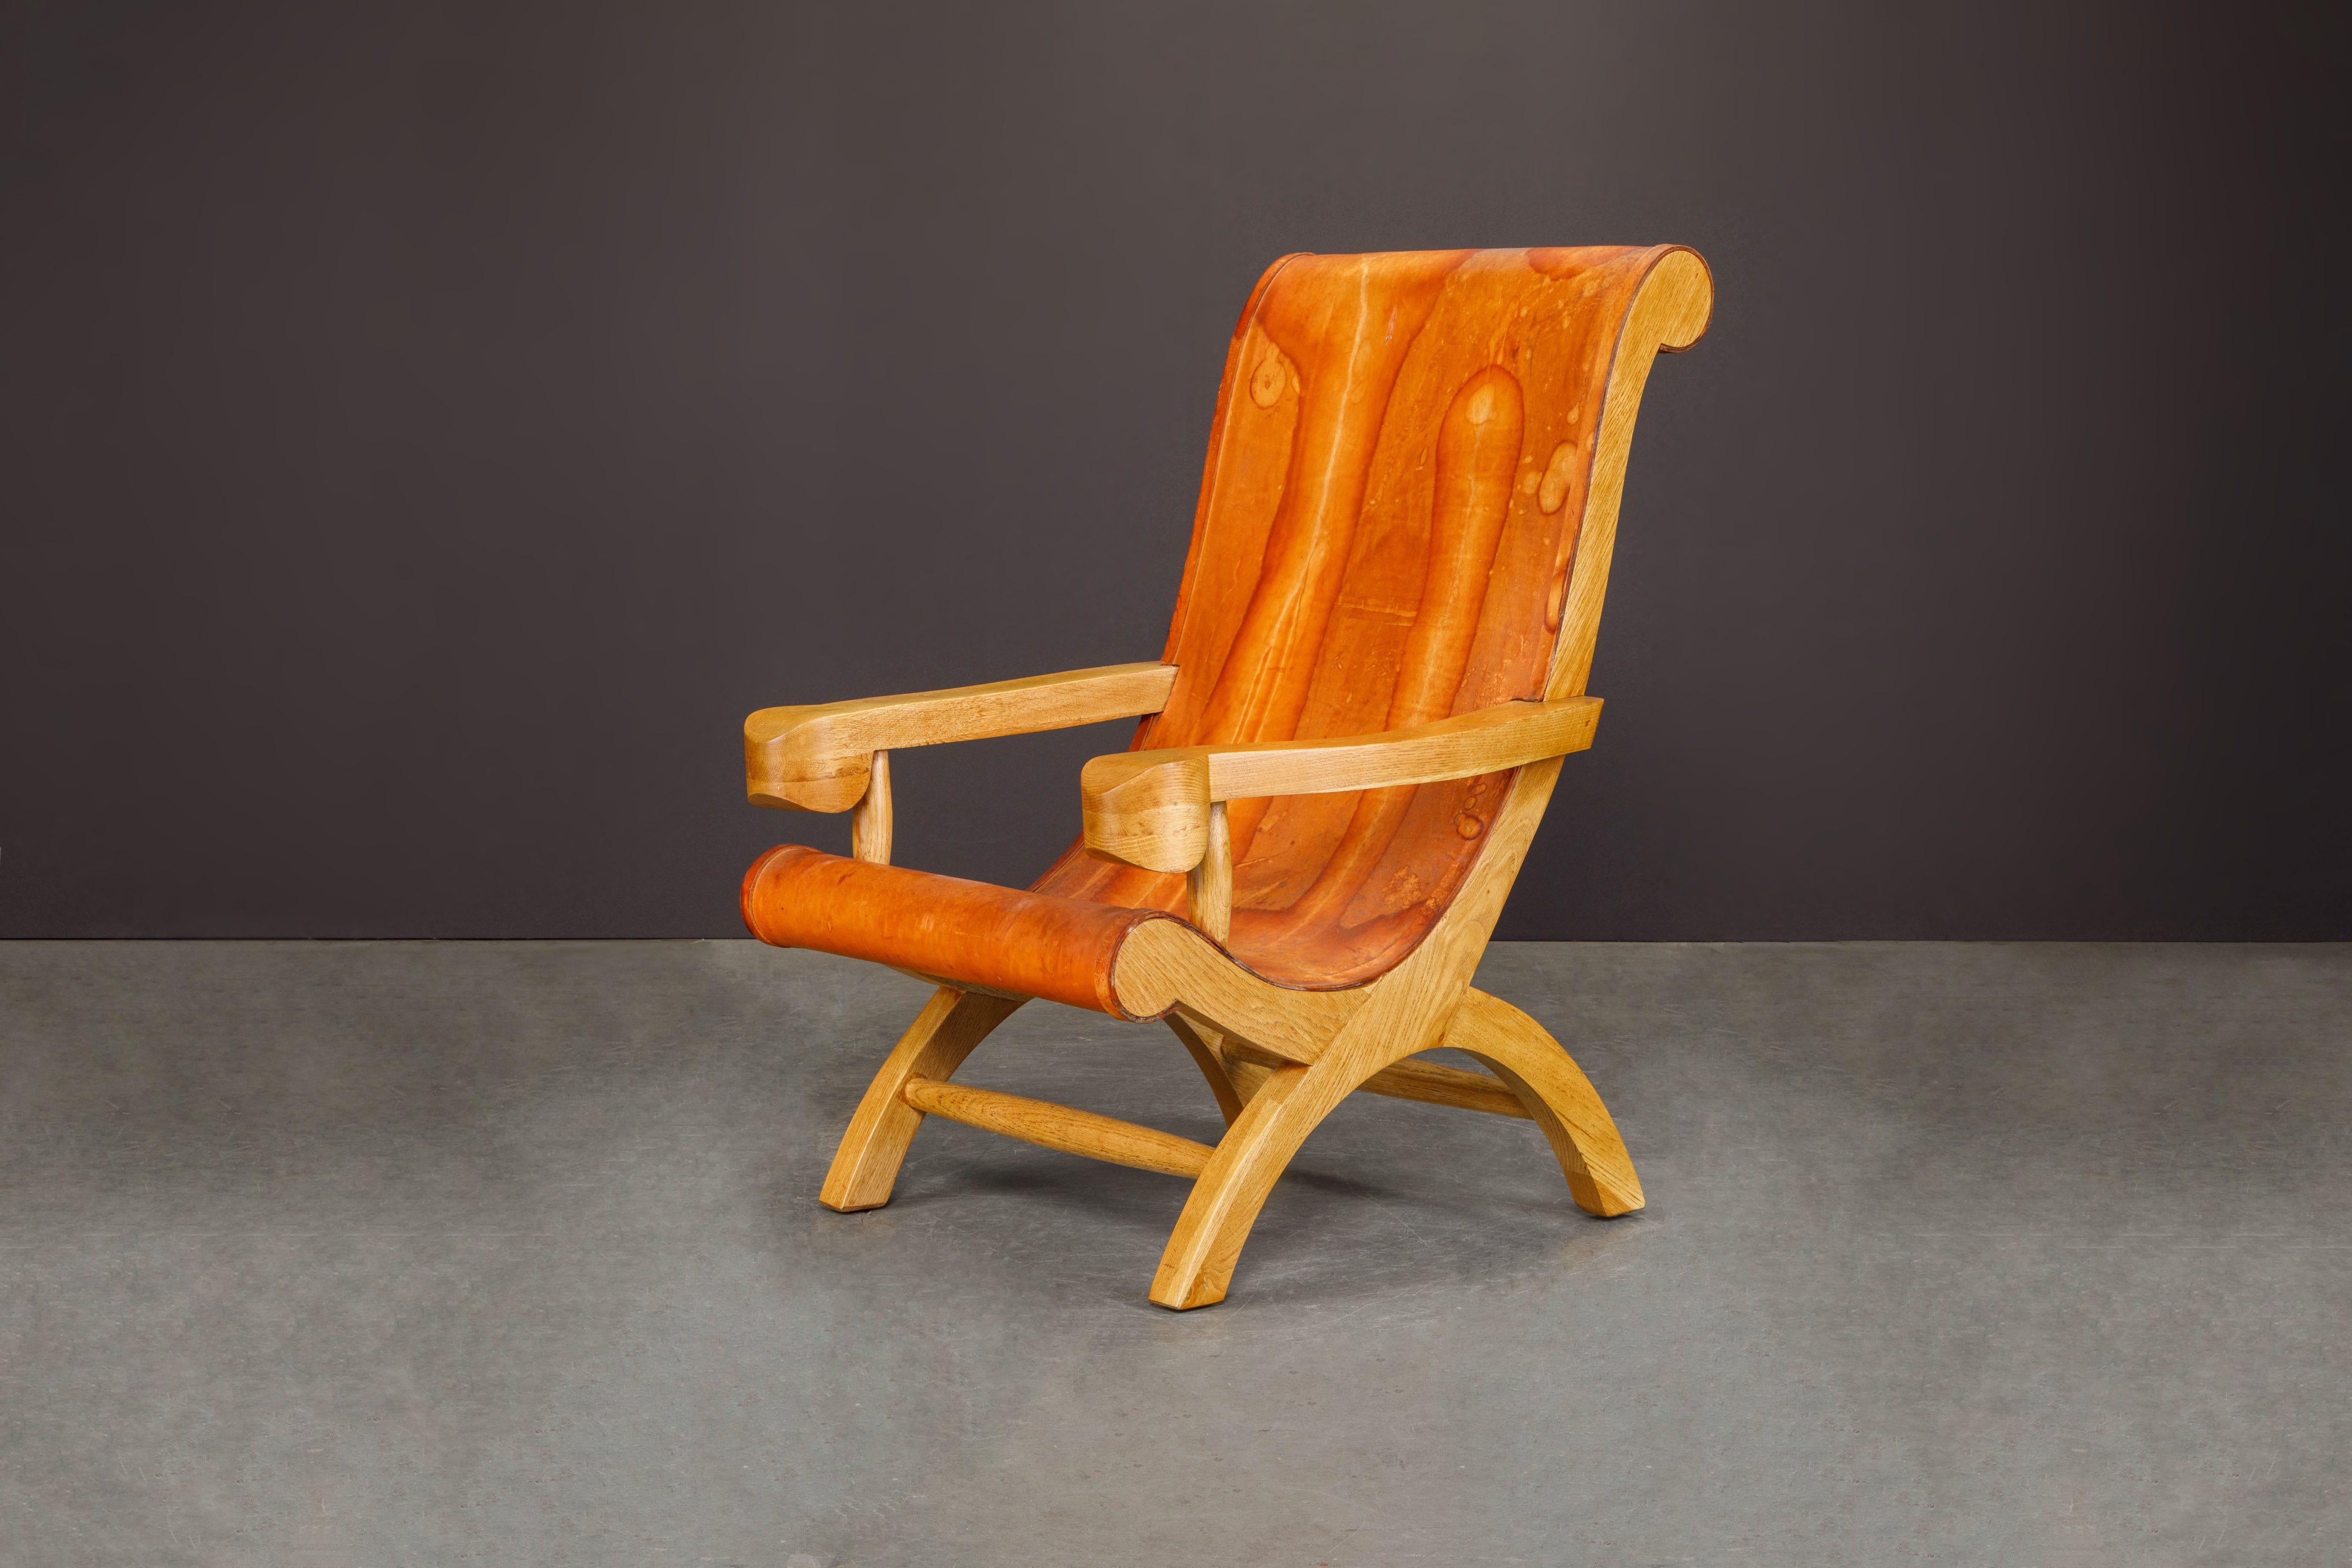 Clara Porset Patinated Leather and Cypress 'Butaque' Armchair, Mexico, c. 1947  3